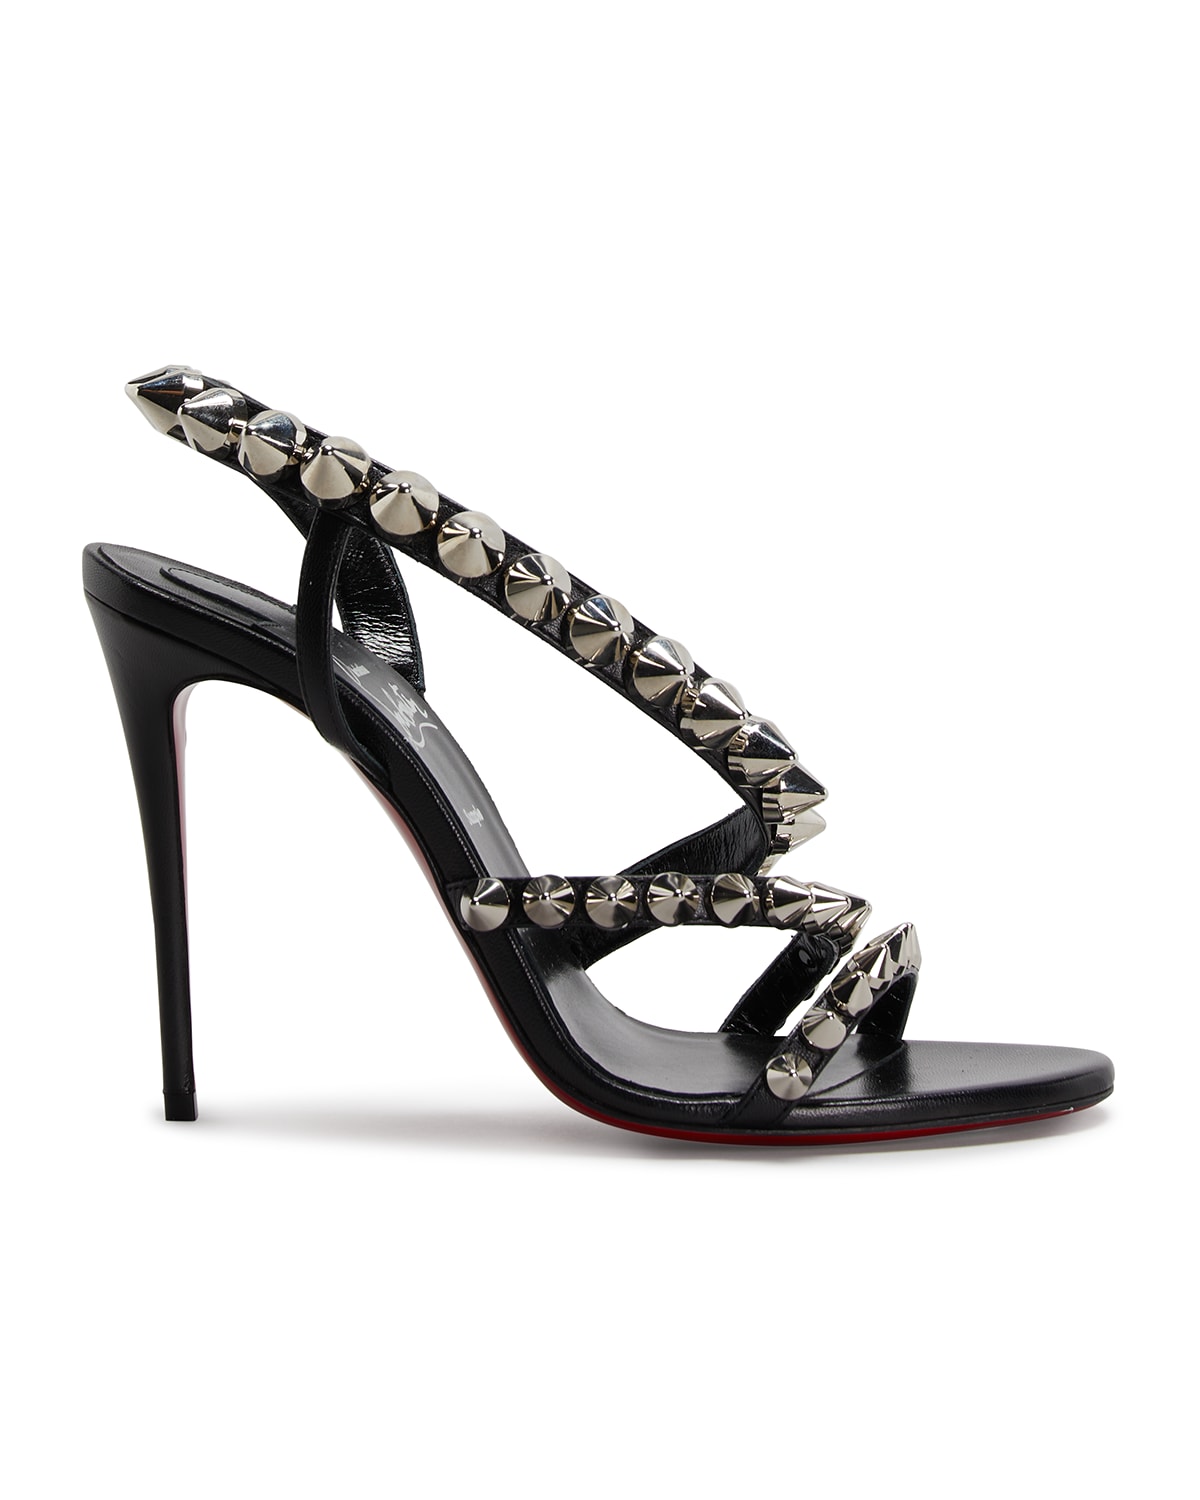 Christian Louboutin Spikita Studded Red Sole Stiletto Sandals